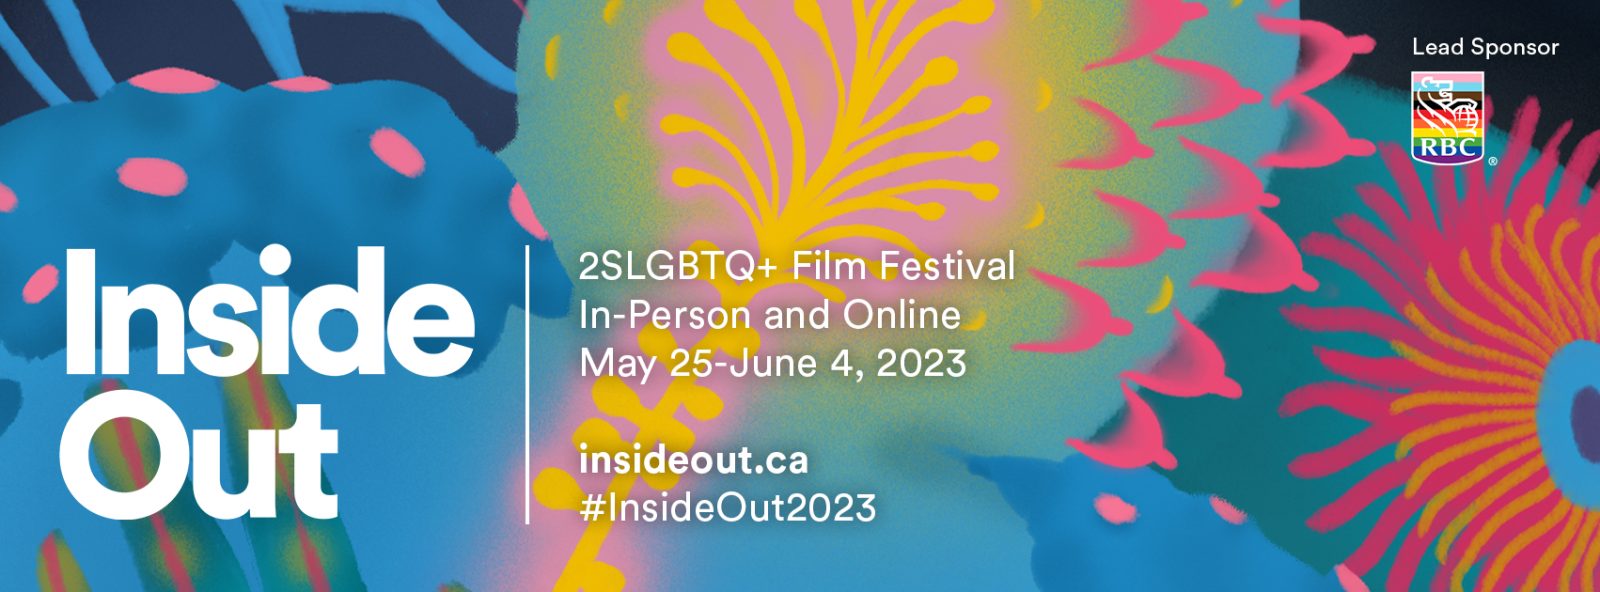 Inside Out is Canada's largest 2SLGBTQ+ Film Festival. The 33rd annual Inside Out Toronto 2SLGBTQ+ Film Festival is taking place May 25-June 4!